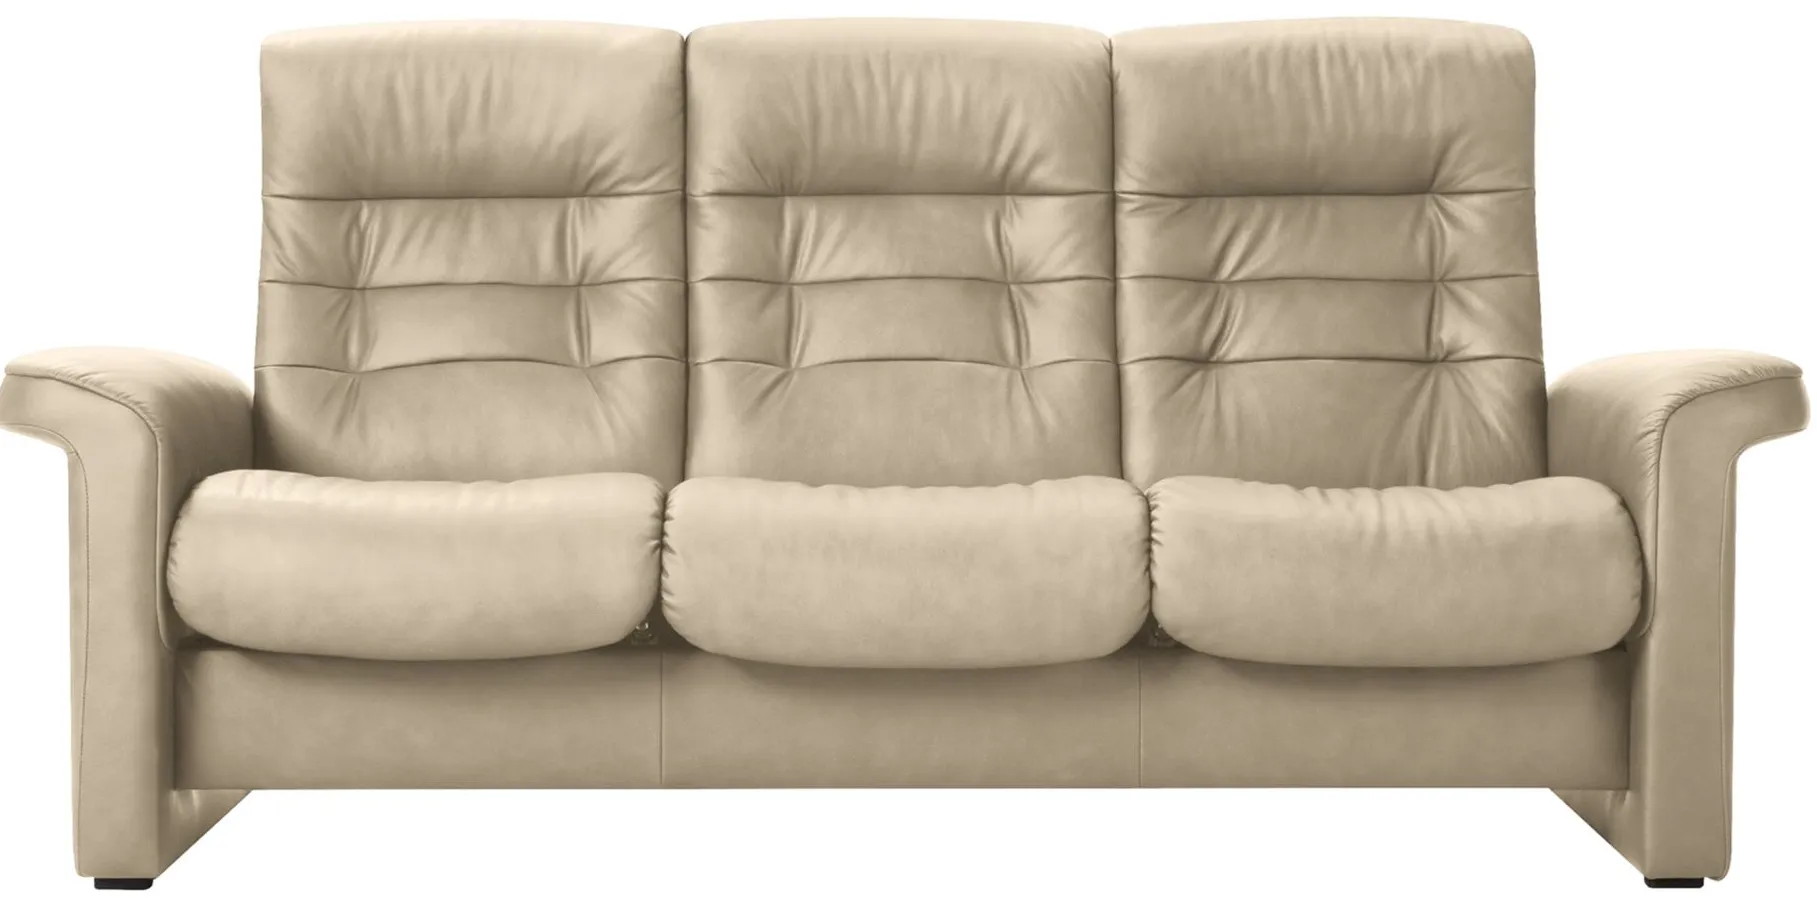 Stressless Sapphire Leather Reclining Sofa in Paloma Light Grey by Stressless